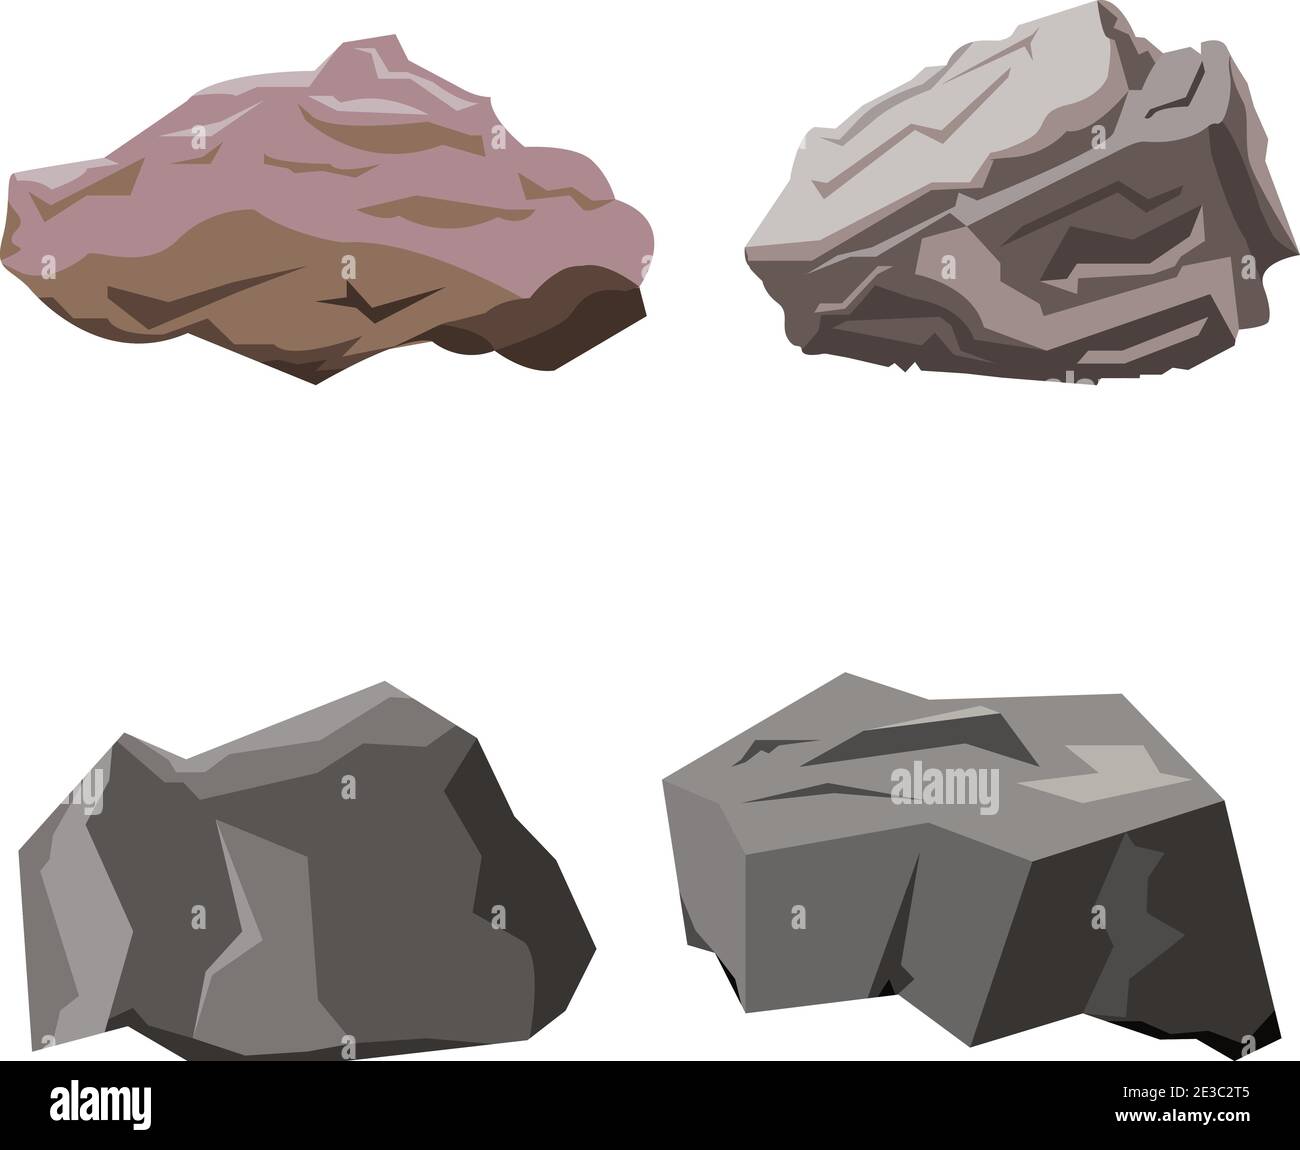 Rock stone cartoon vector in isometric 3d flat variety style. Set of different boulders and color shades. Cartoon props landscape decor. Stock Vector